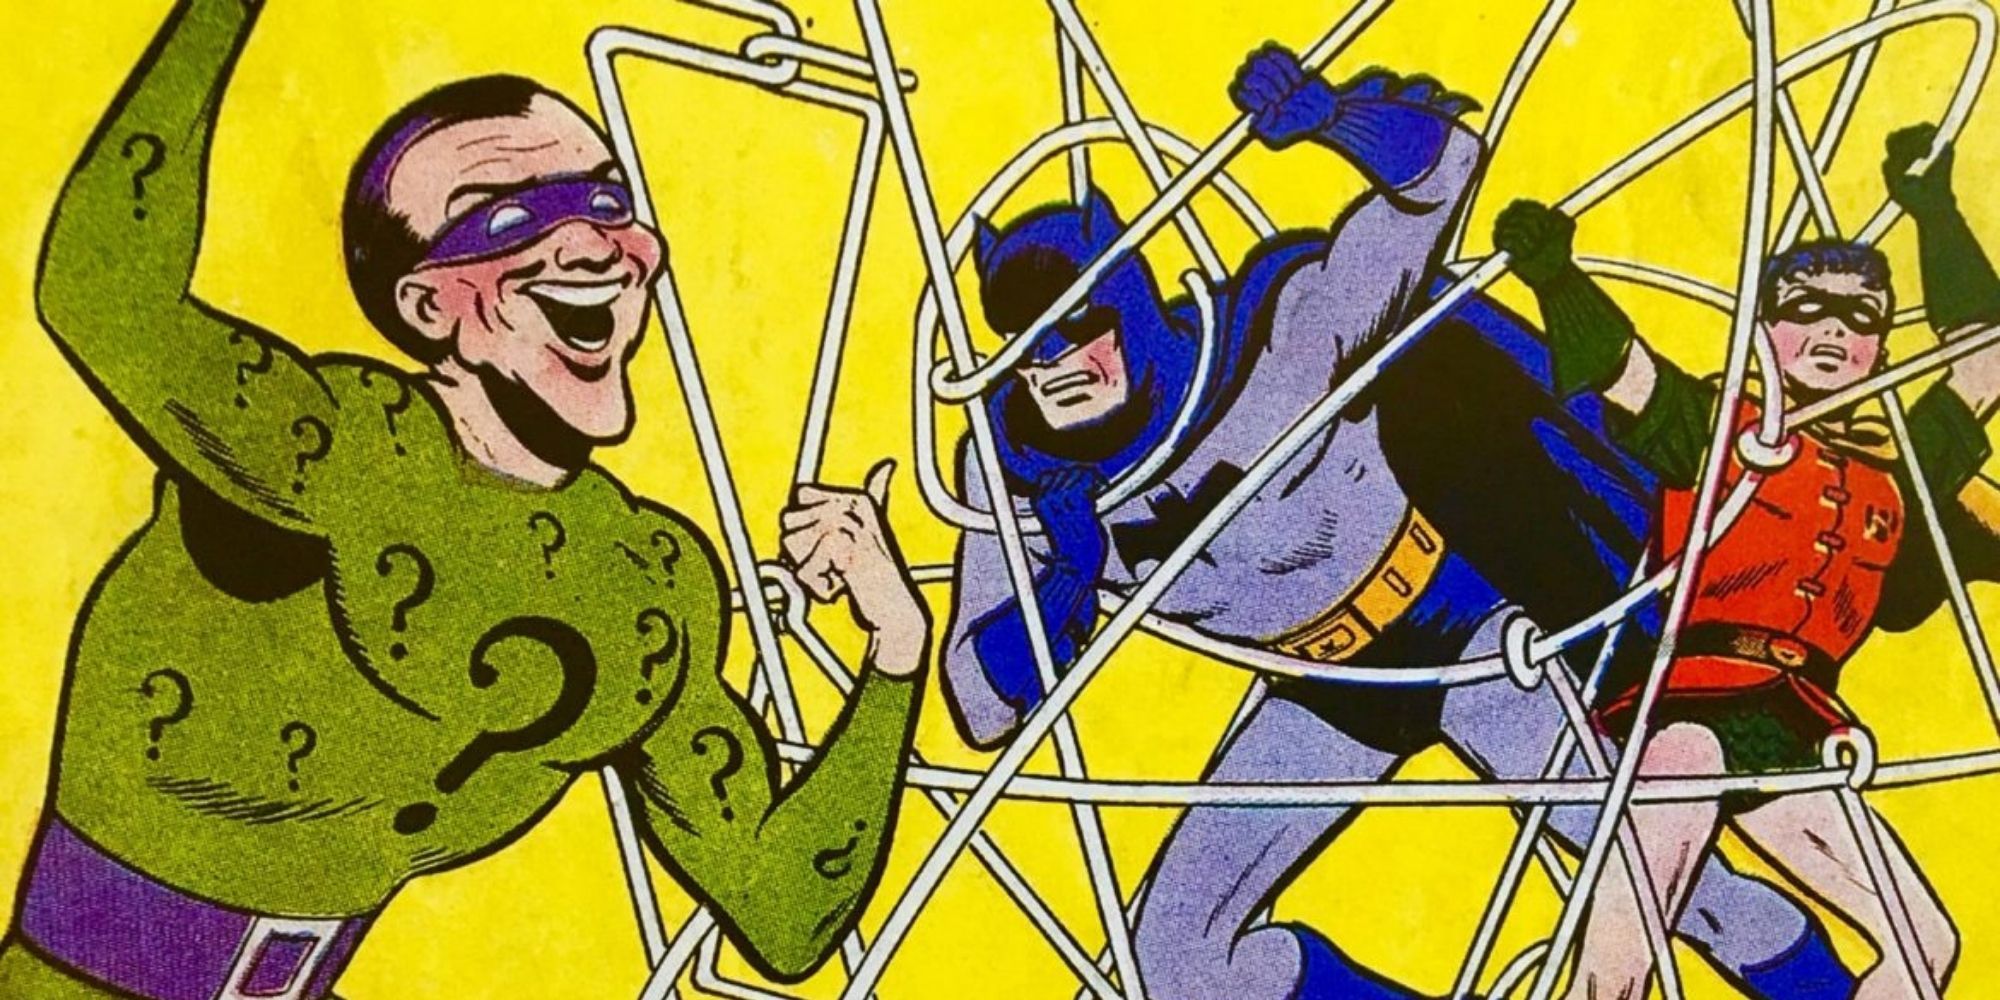 Riddler trapping Batman and Robin in a web of strings in DC comics